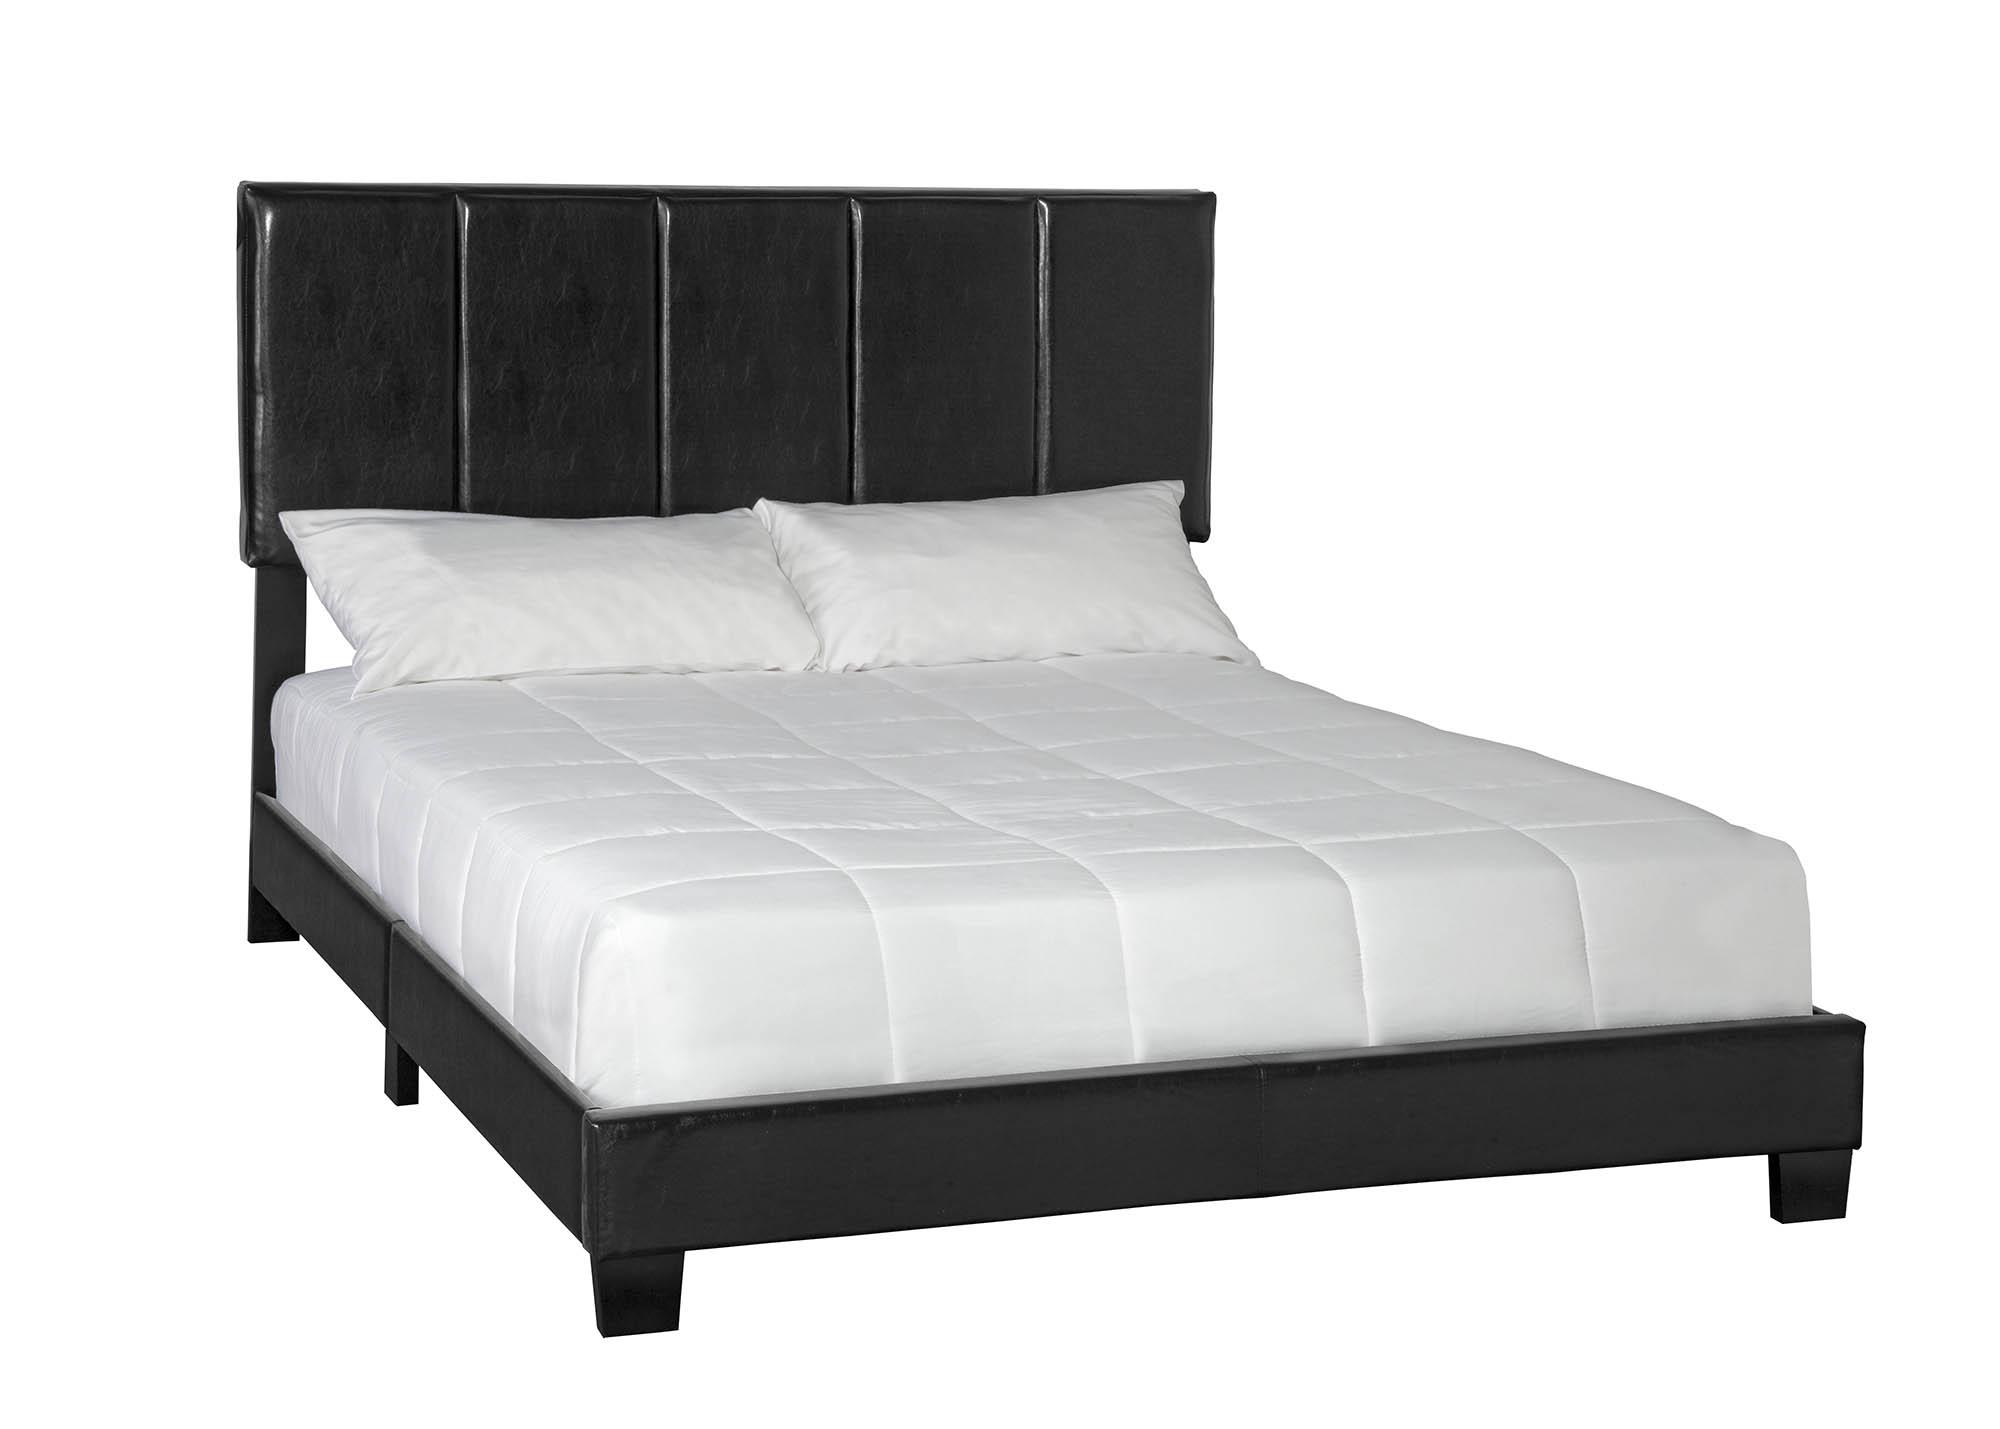 Modern, Transitional Panel Bed HARPER 1601DS-105 1601DS-105 in Black Eco Leather